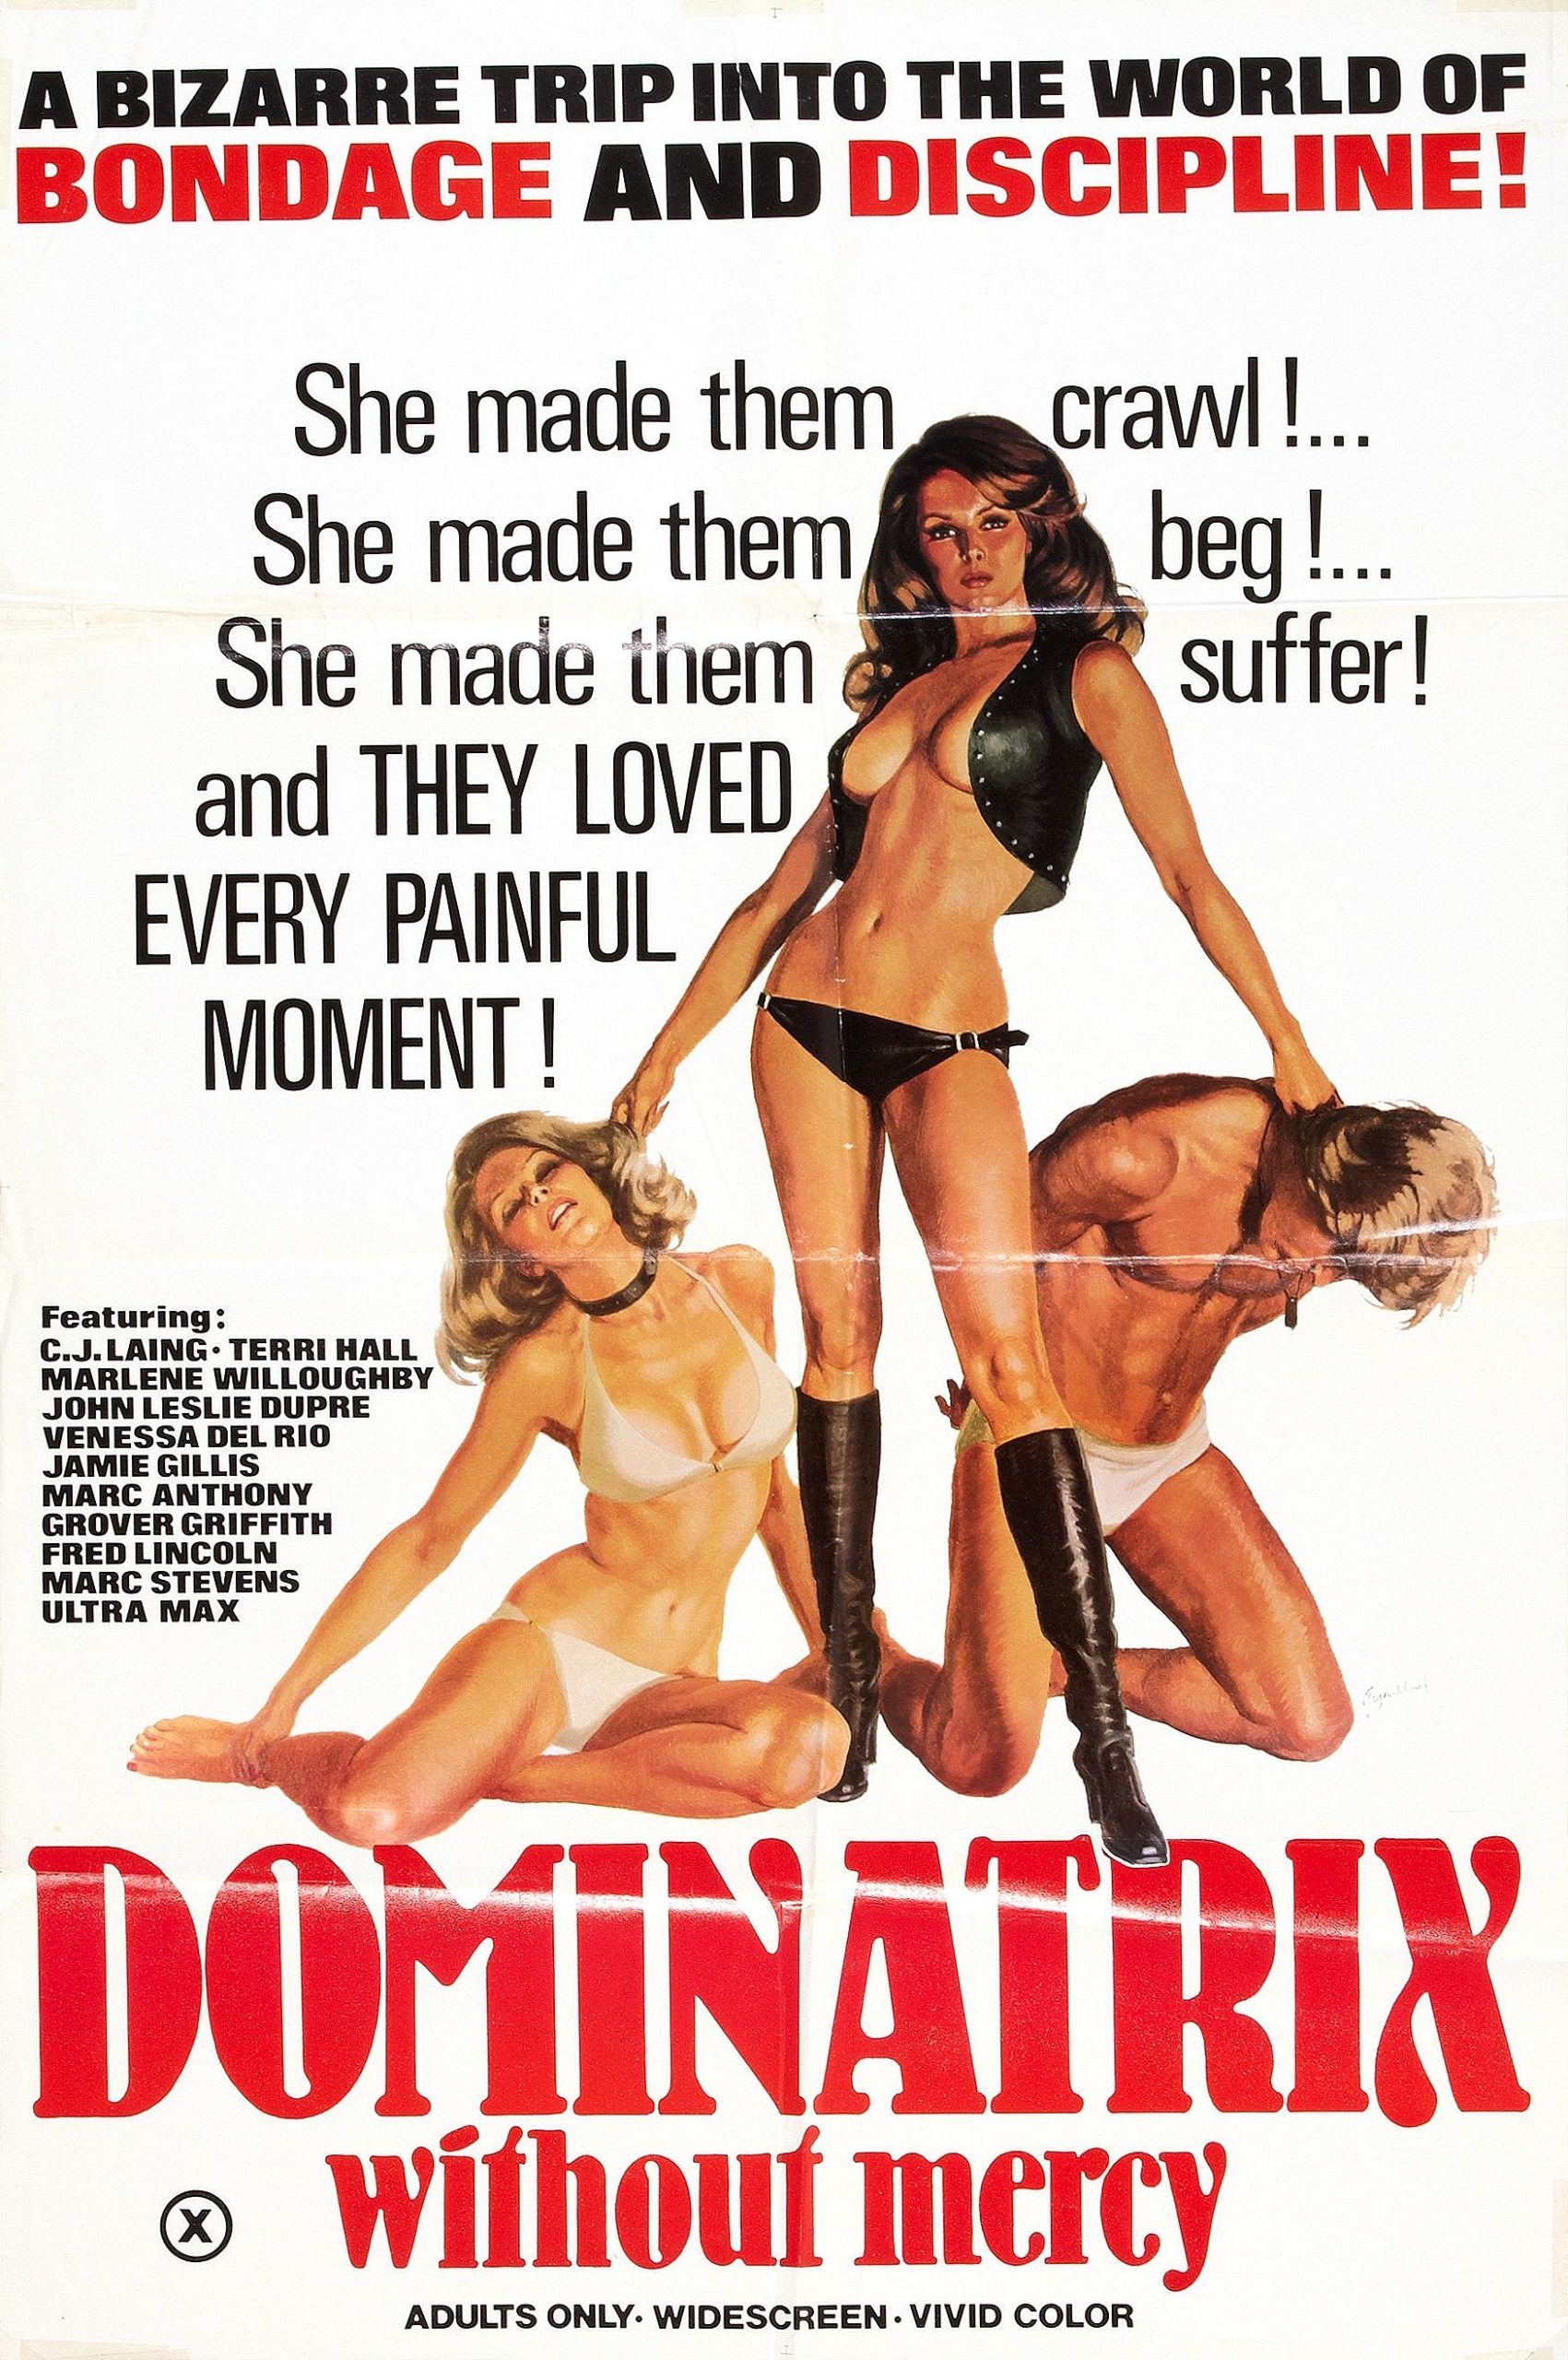 Sex on Display: The Golden Age of Adult Film Posters â€“ PRINT Magazine